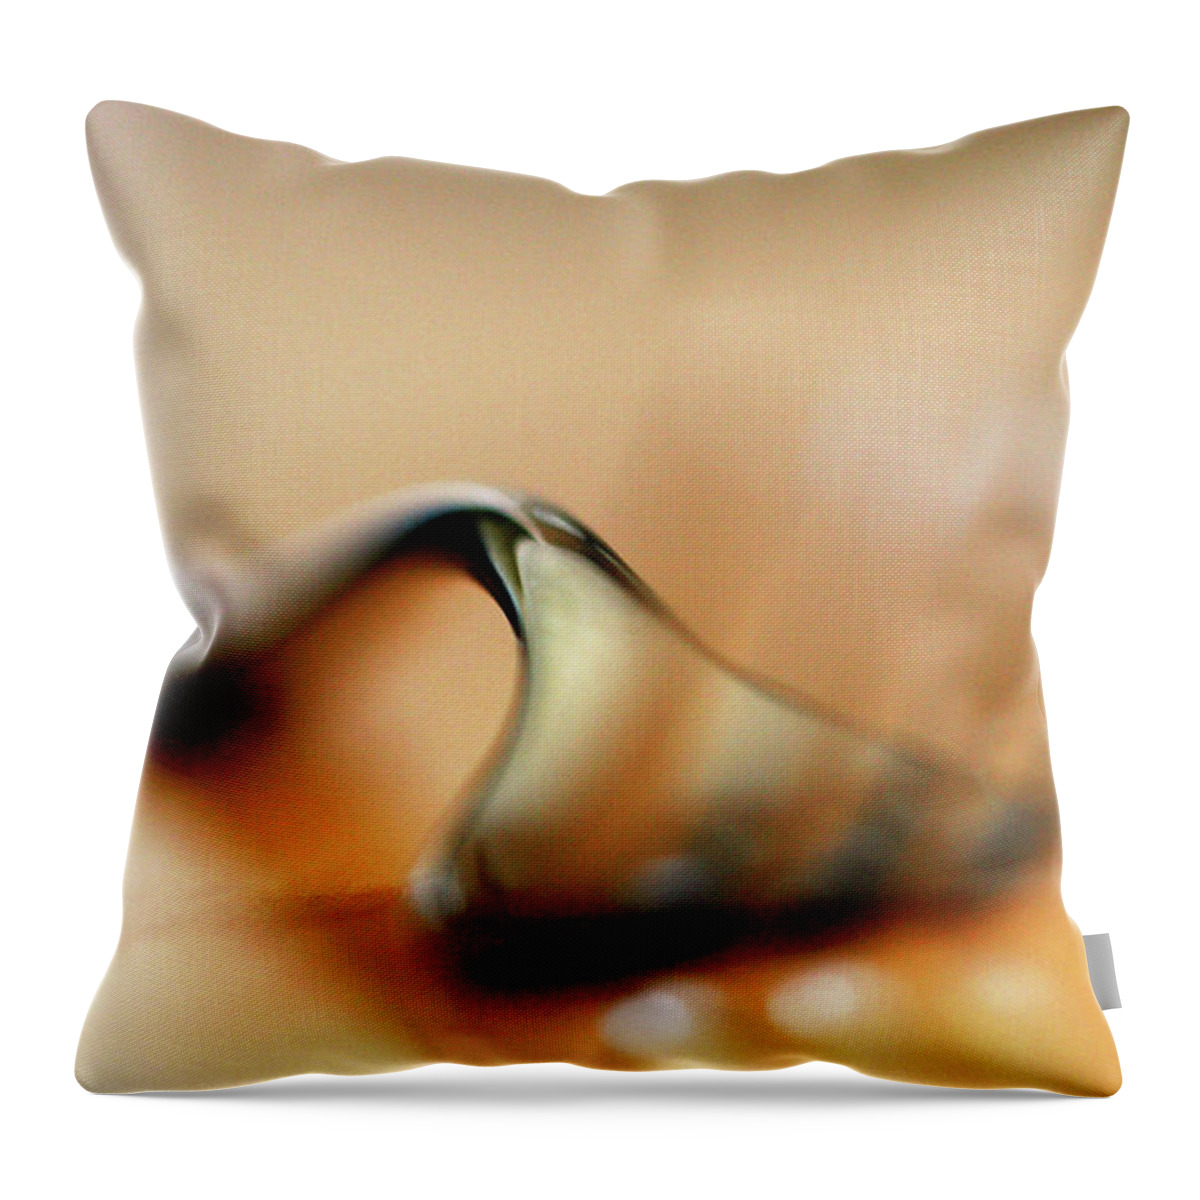 Single Object Throw Pillow featuring the photograph Fork It Over by Steven Brisson Photography